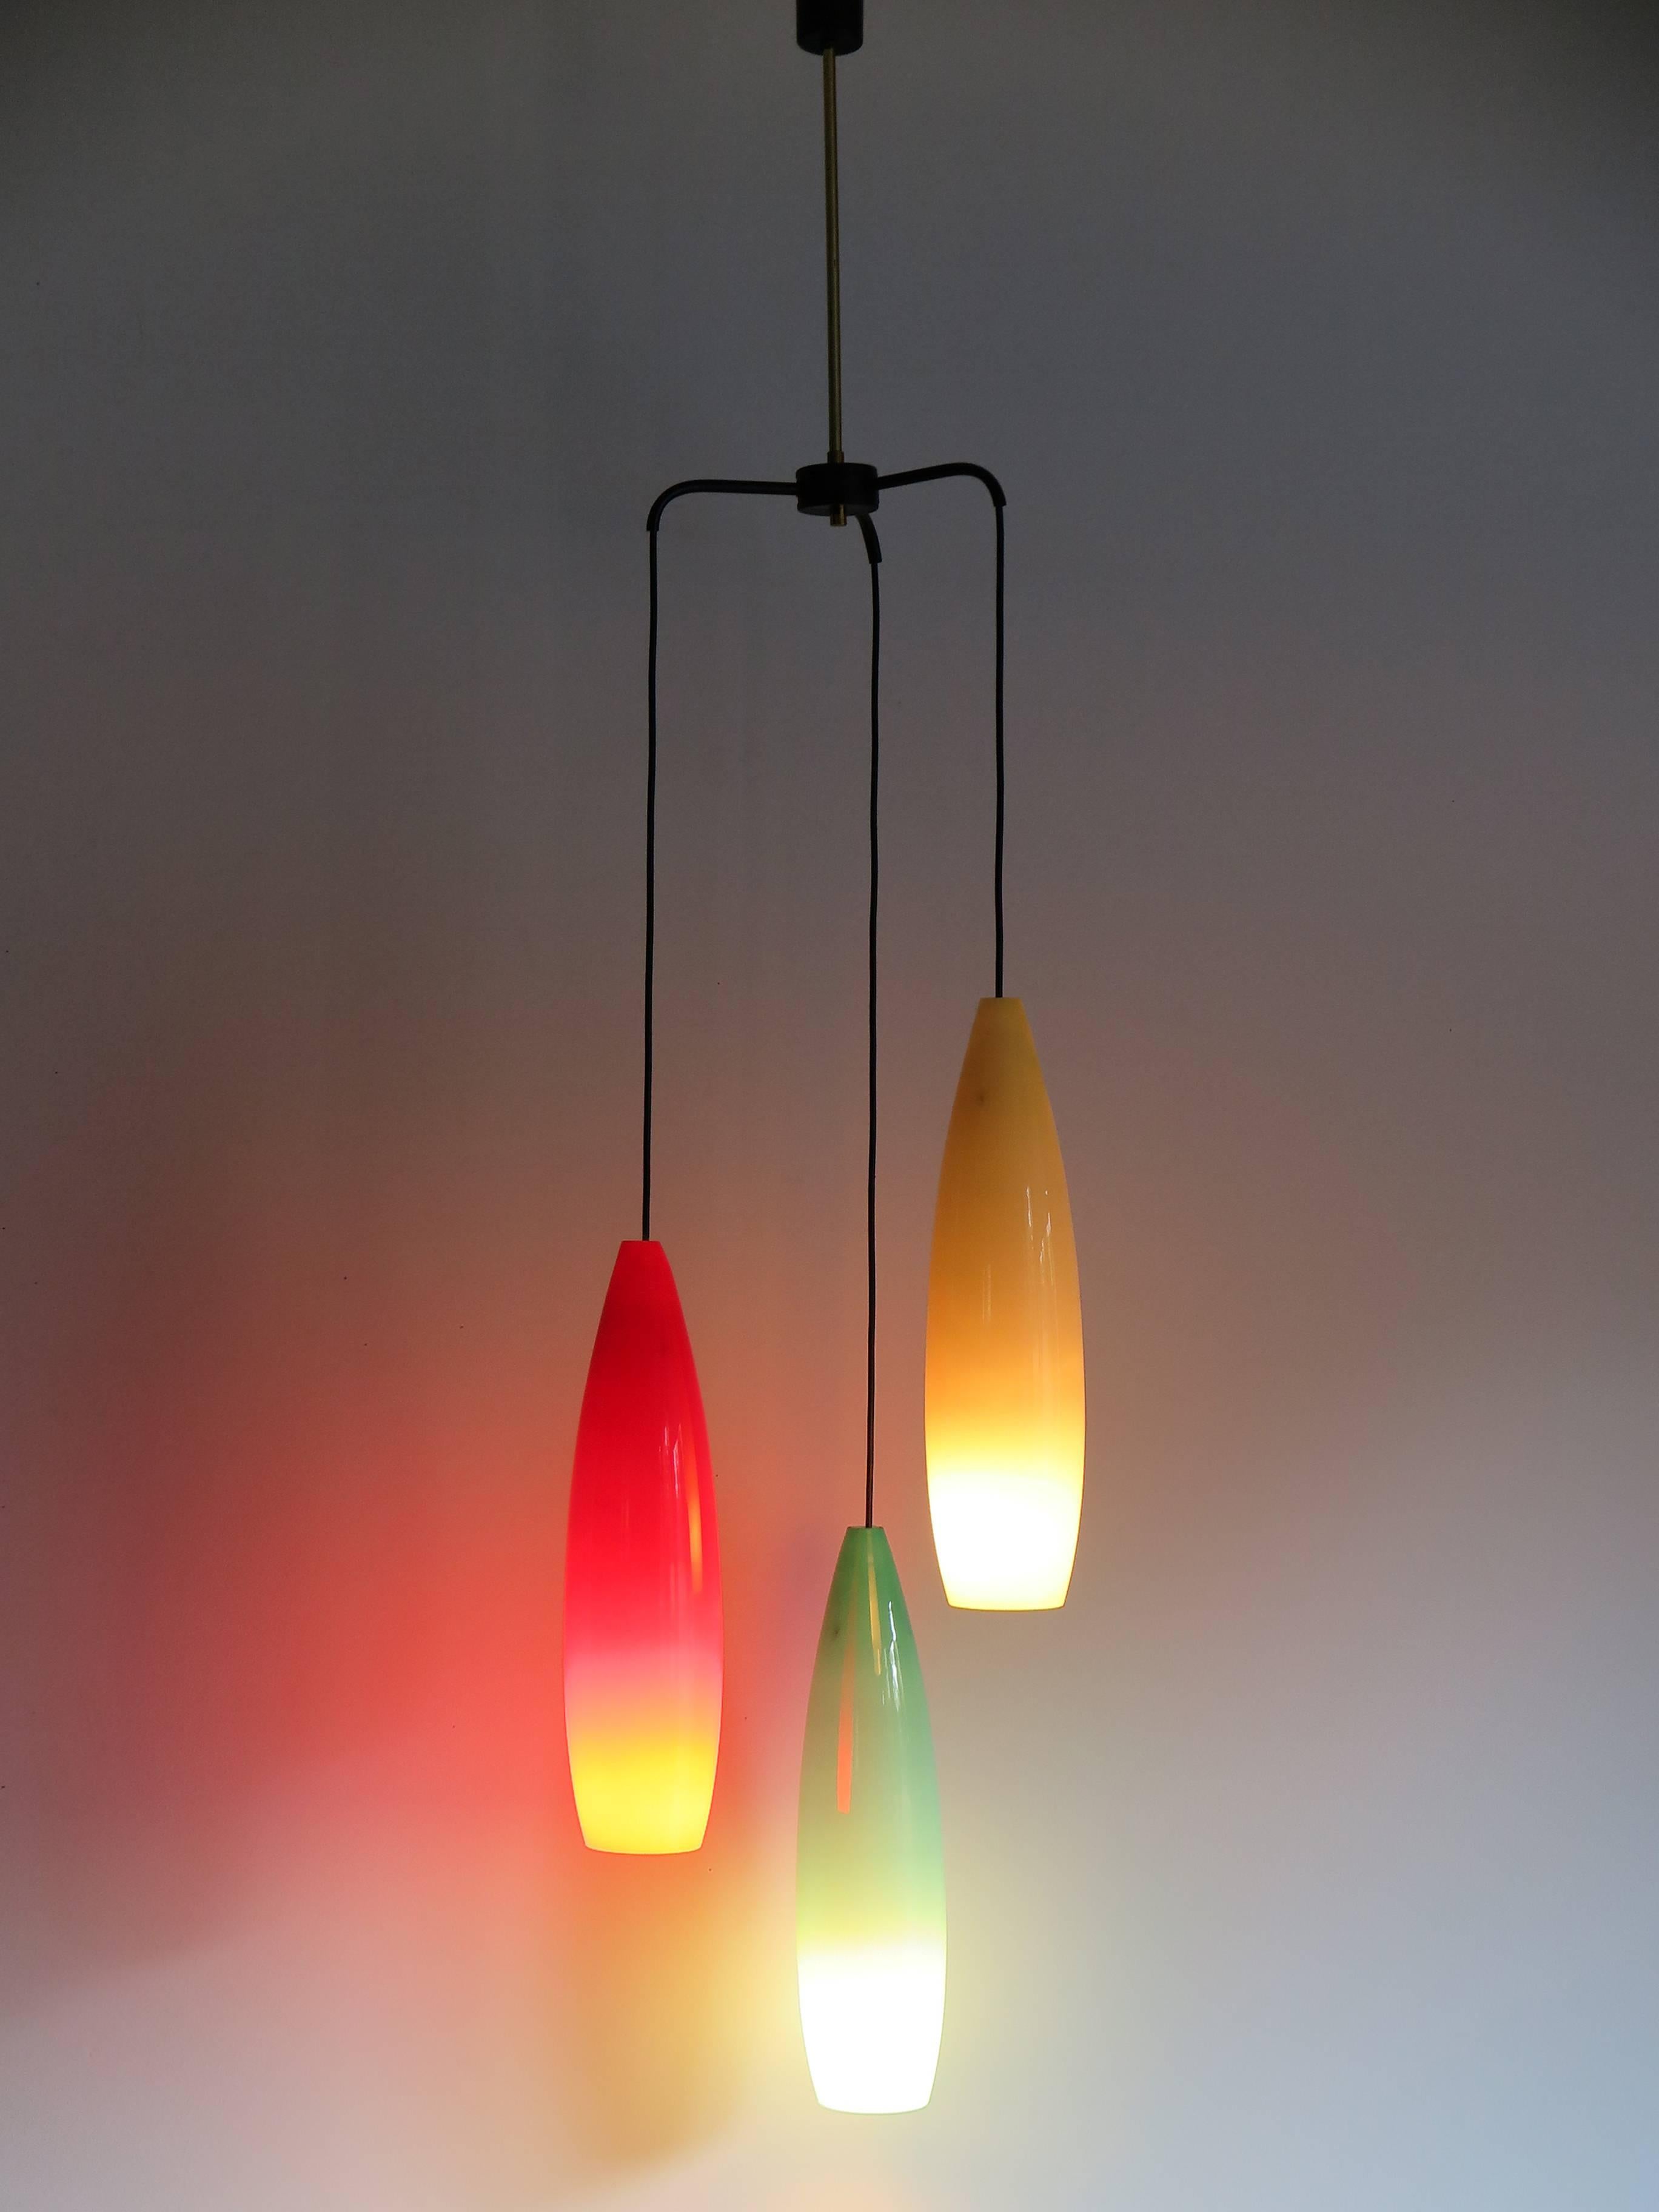 1950s Italian pendant lamp with painted metal structure with brass detail and colored glass diffusers, the height of each individual glass diffuser is 46 cm.